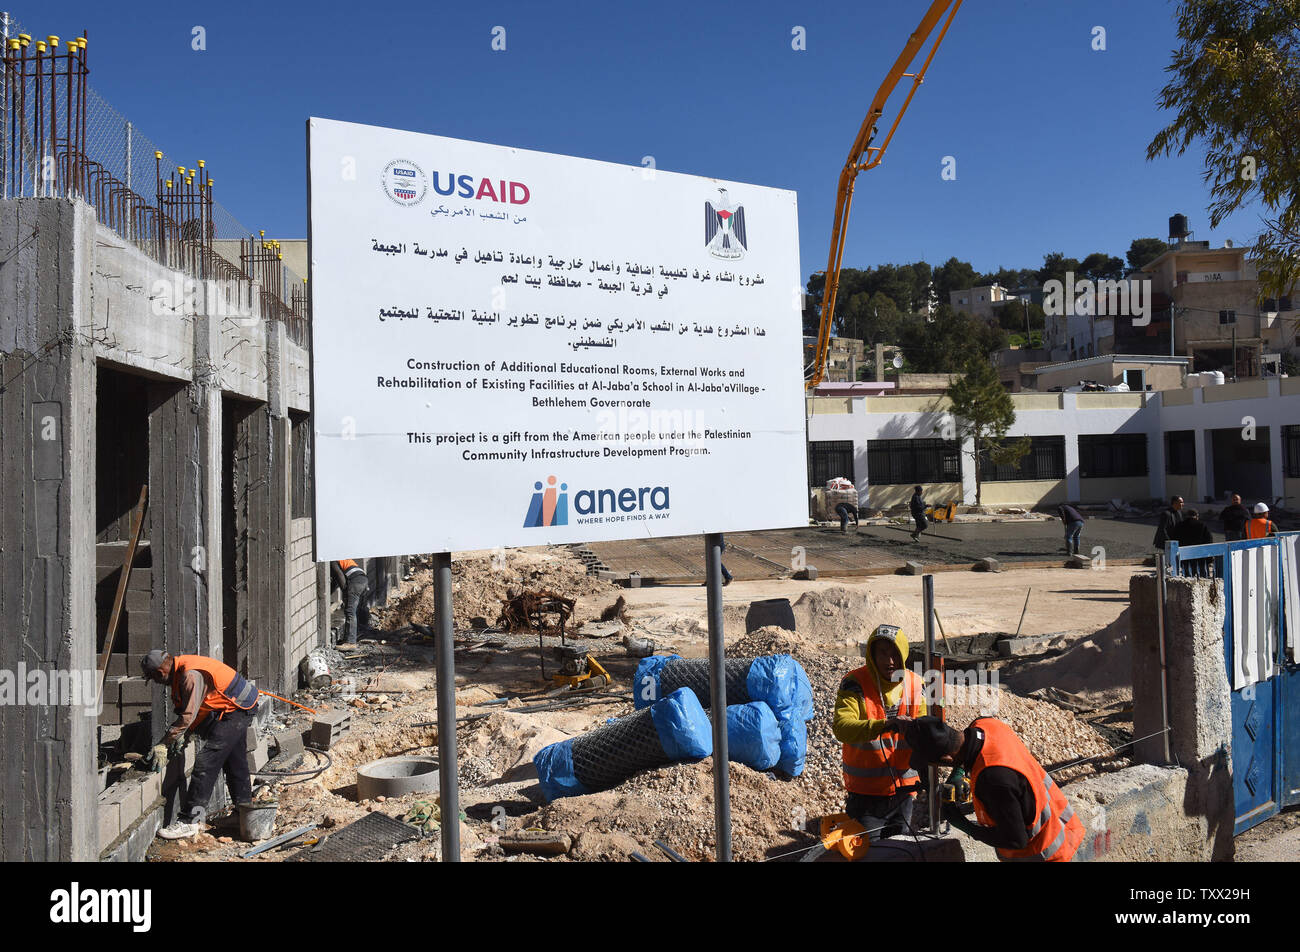 Palestinian construction workers renovate and build an extension to the girl's school in Al-Jabba, near Bethlehem, West Bank, which is funded by USAid, United States Agency for International Development, January 23, 2019. The $1.4 million dollar project will be terminated at the end of January because U.S. President Donald Trump's administration will stop funding Palestinian projects and also because Palestinian Prime Minister Rami Hamdallah has stated that the Palestinian Authority will cease accepting funding from America. The school will be unusable for the 250 girl students who attend the Stock Photo